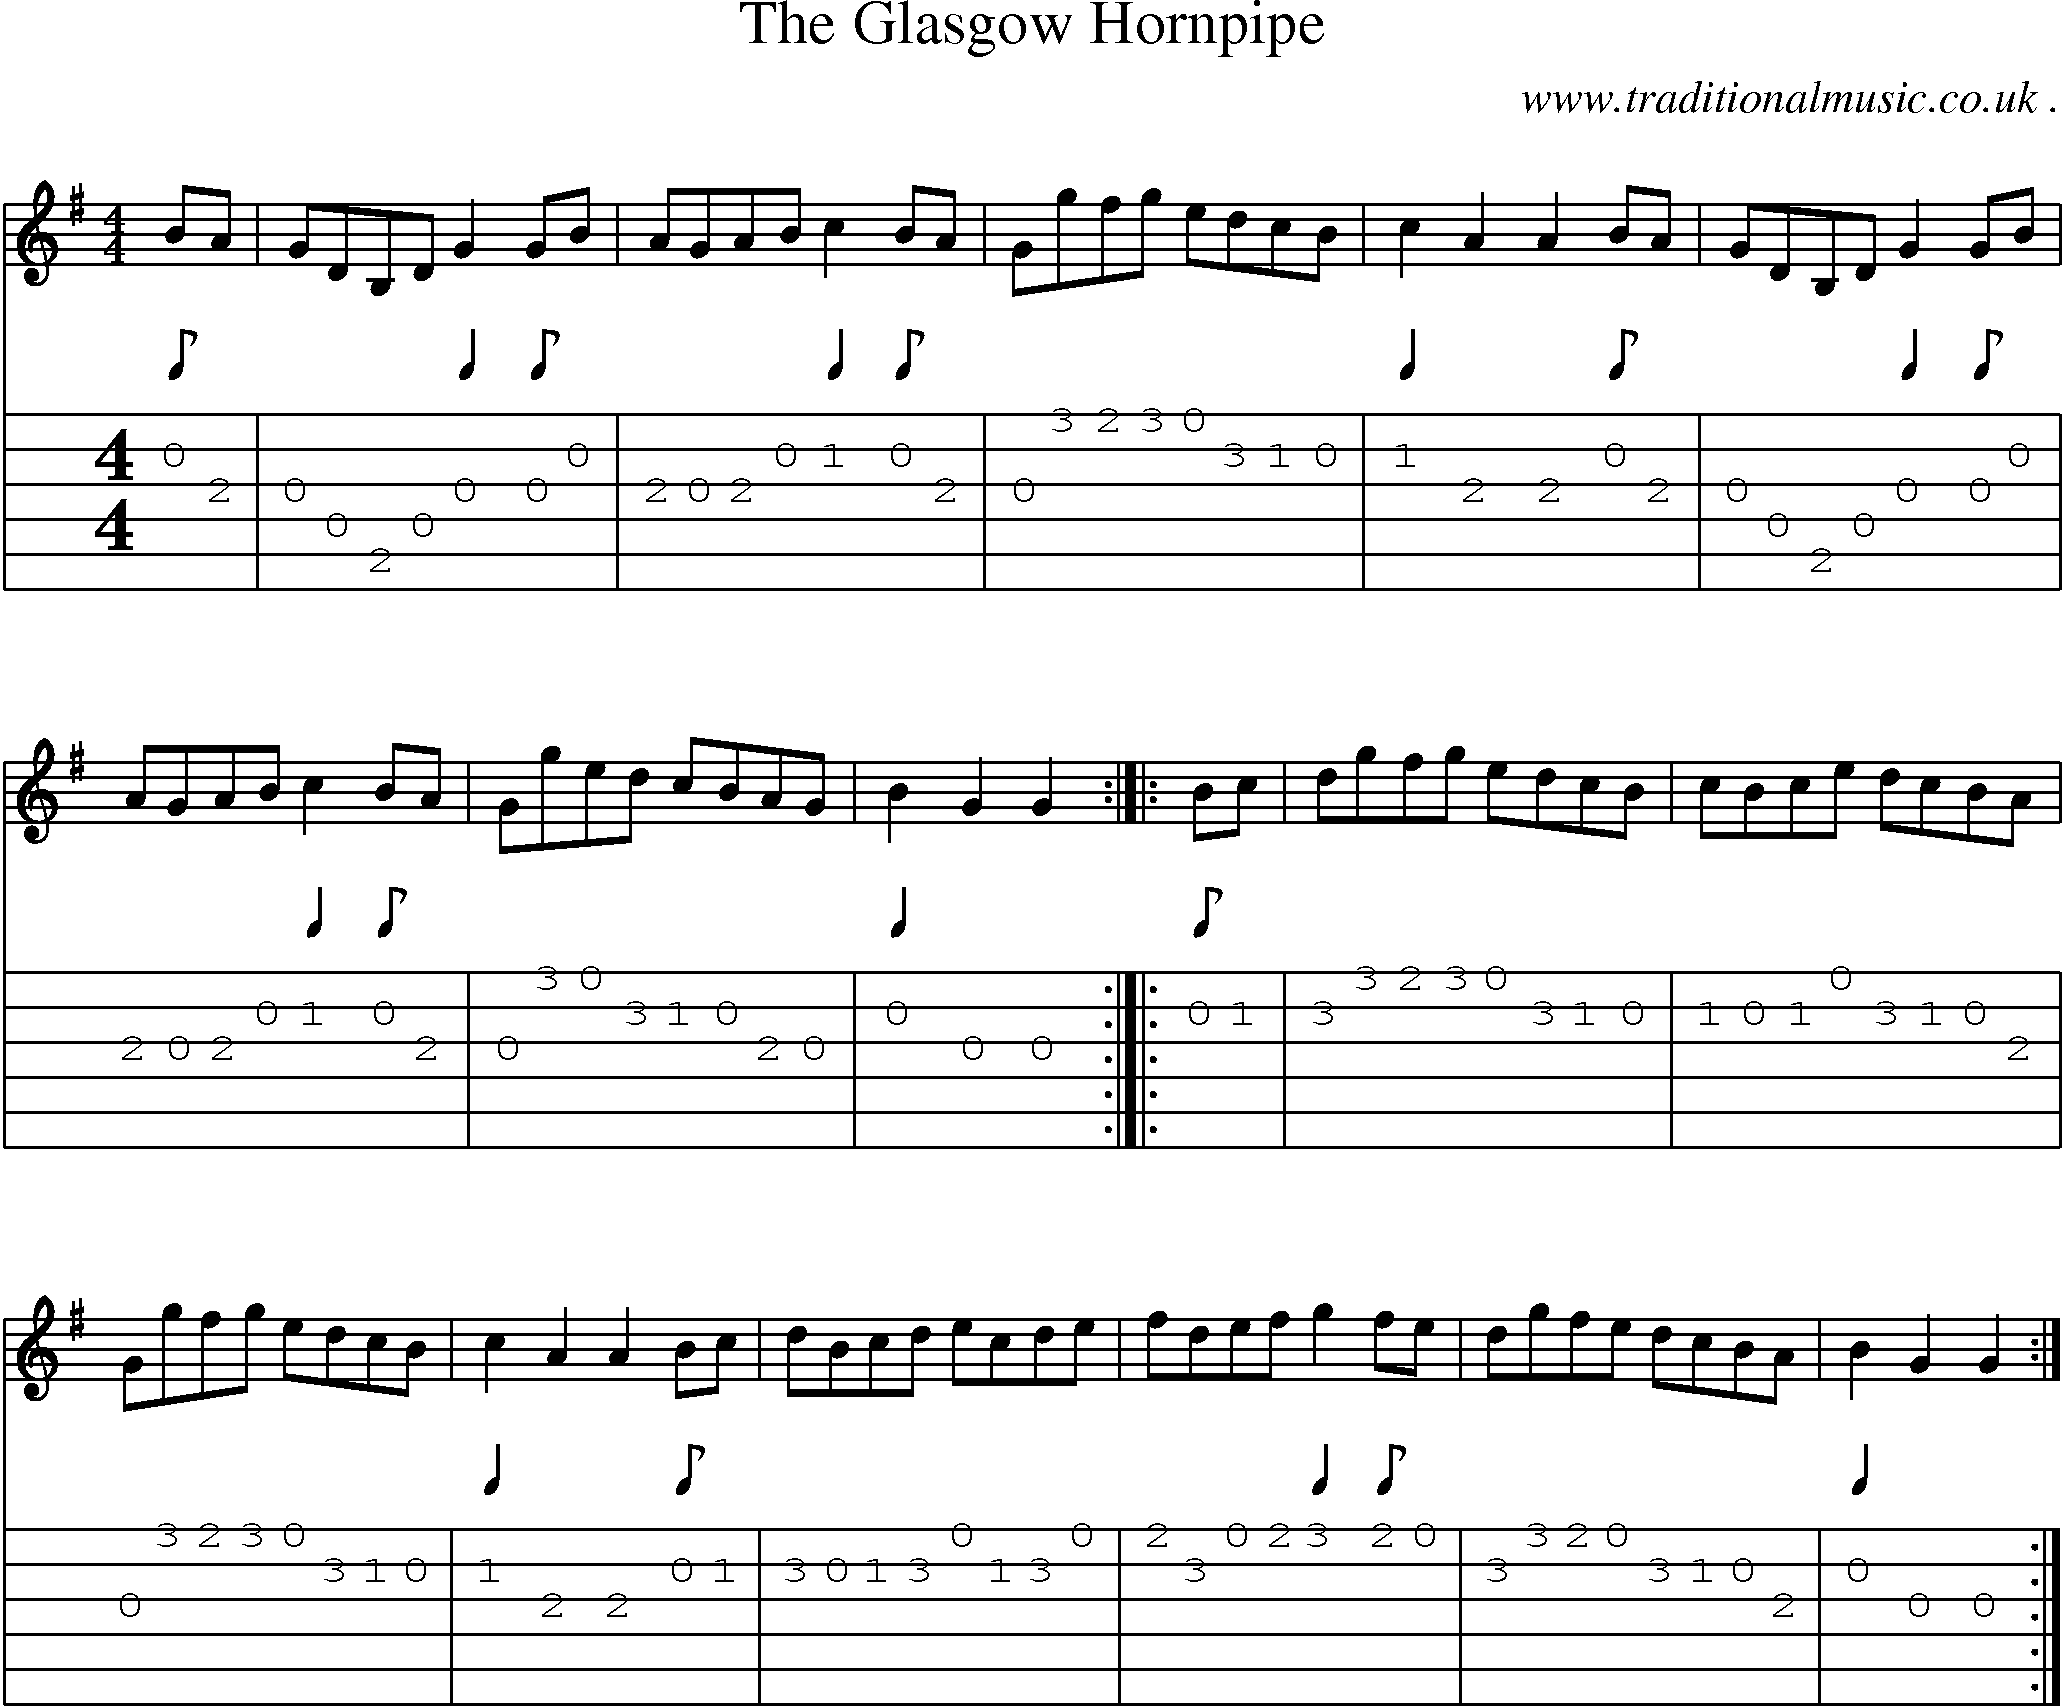 Sheet-Music and Guitar Tabs for The Glasgow Hornpipe